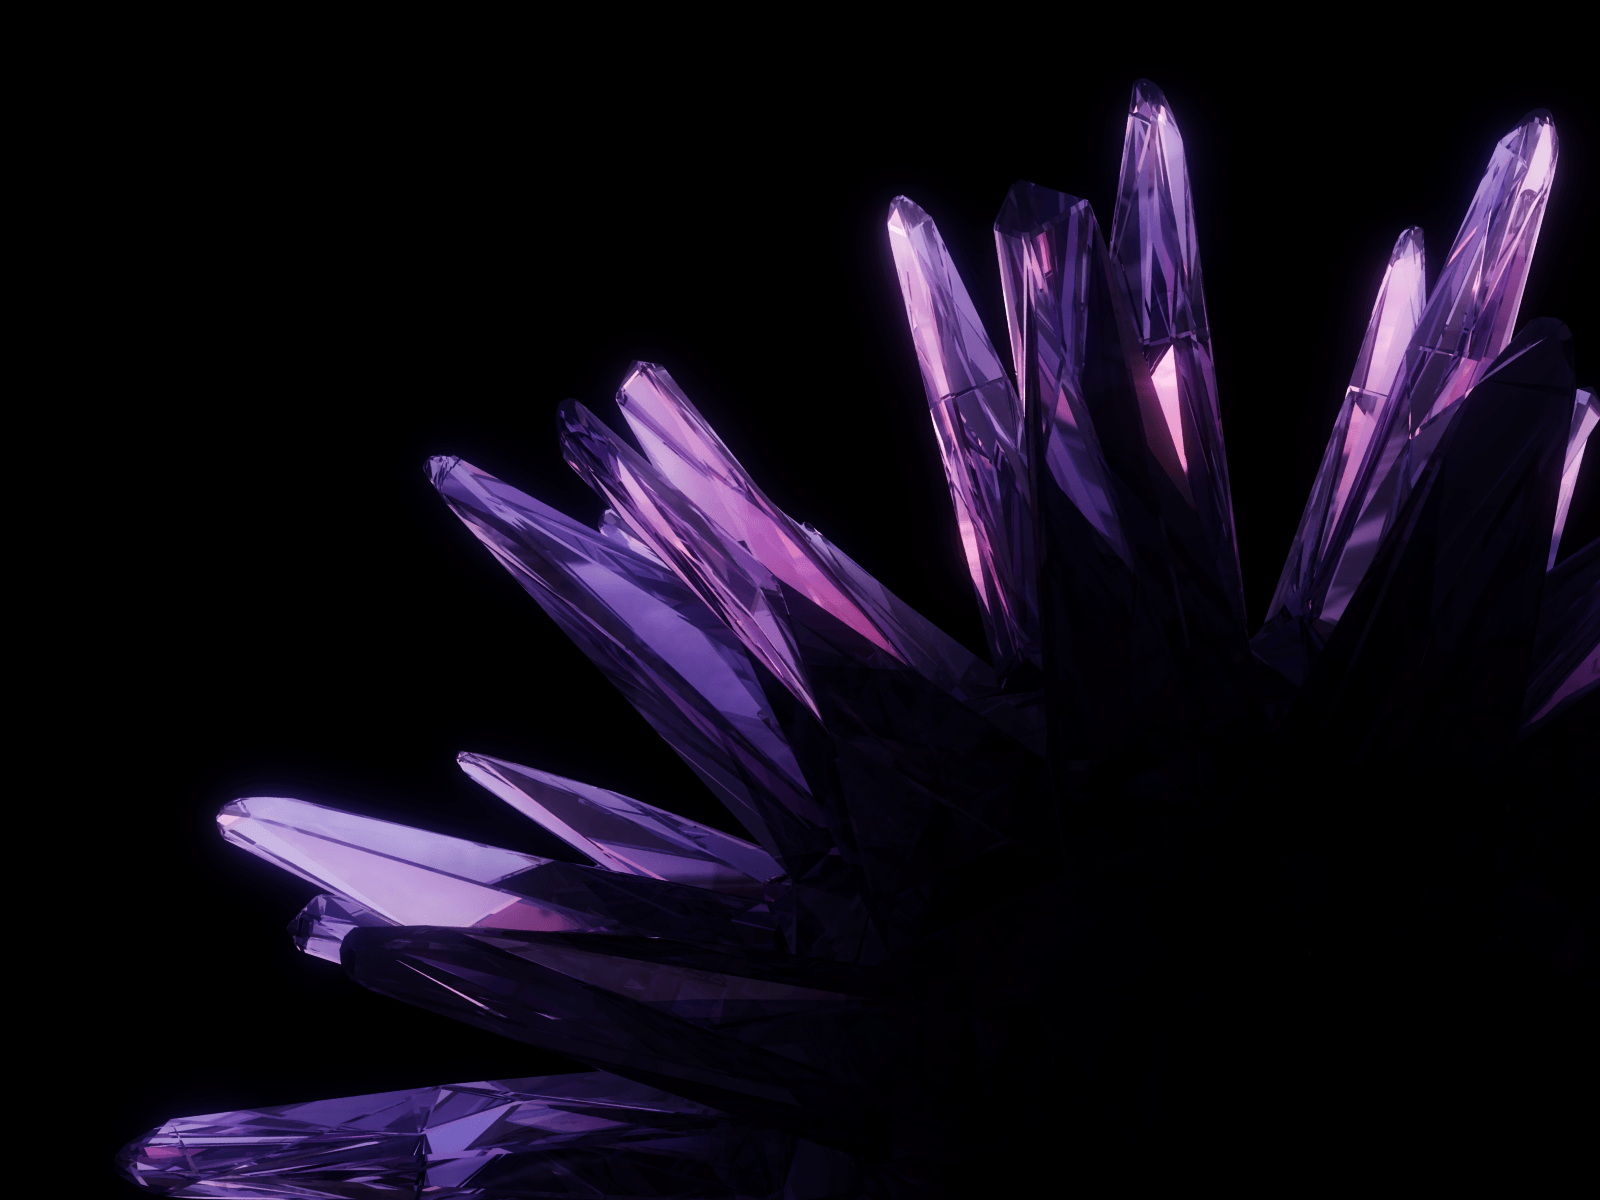 Amethyst.png (1600×1200)D Reference